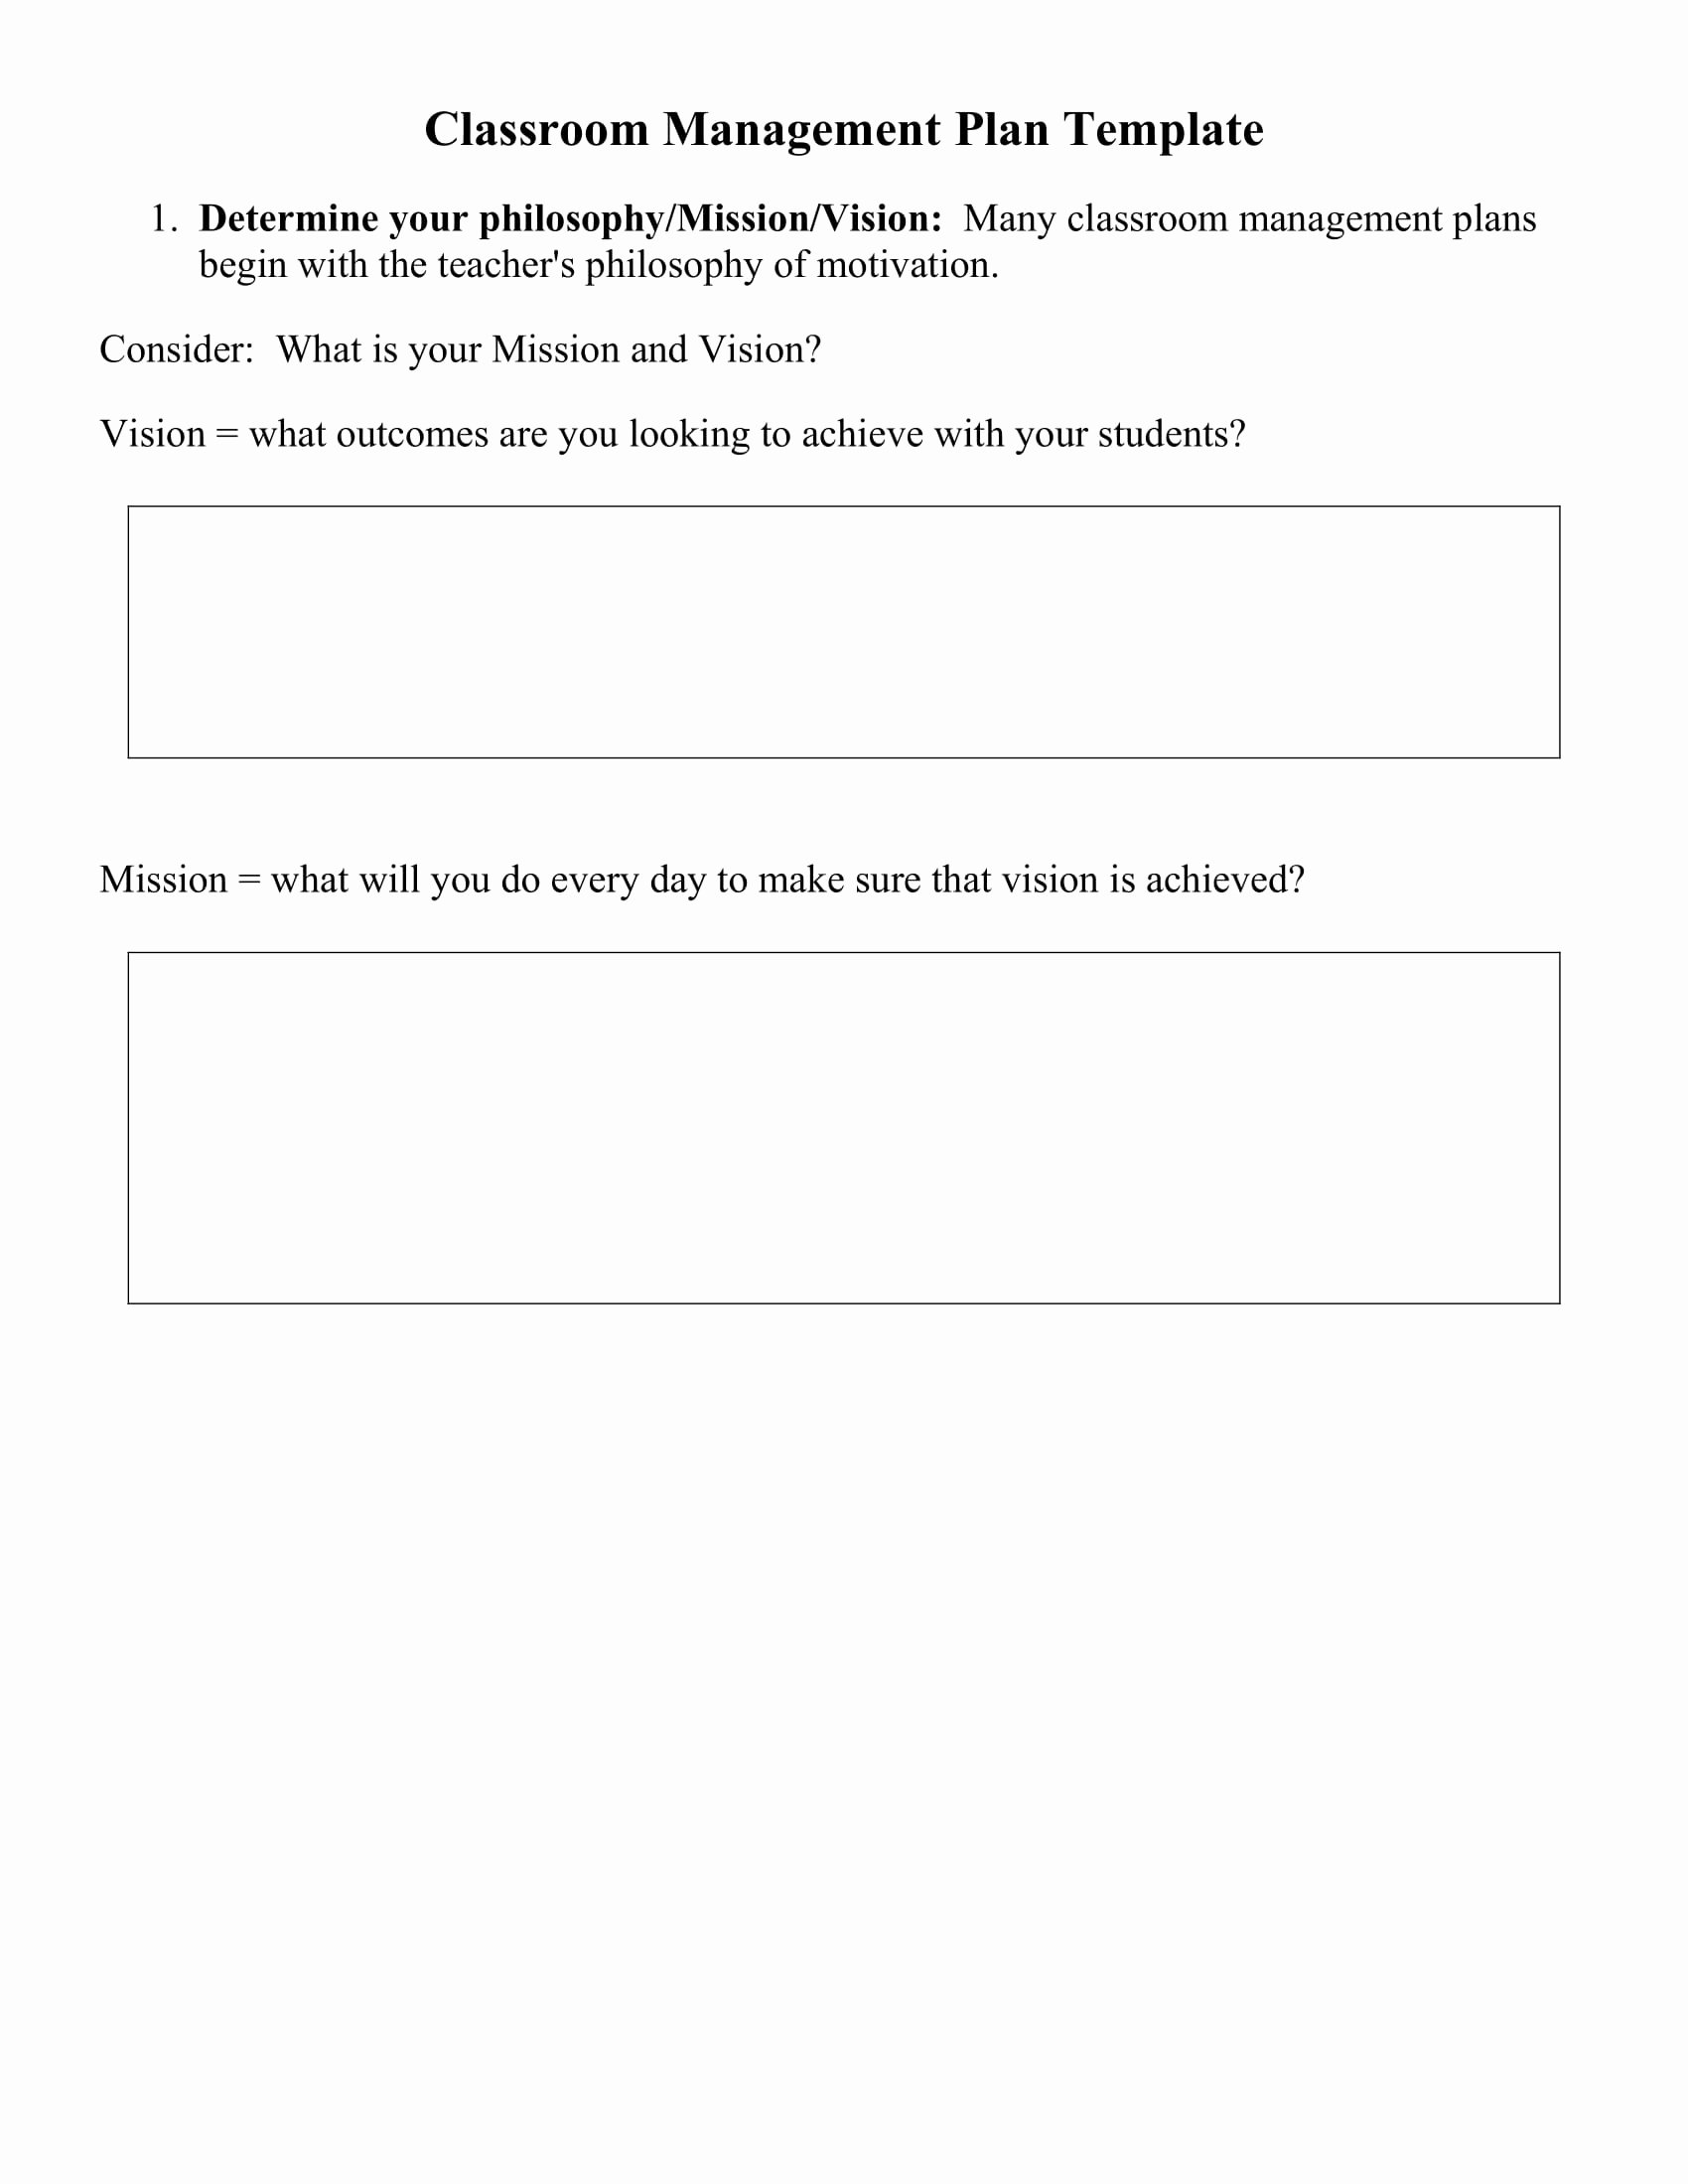 Classroom Management Plan Template Awesome 8 Effective Classroom Management Plan Examples Pdf